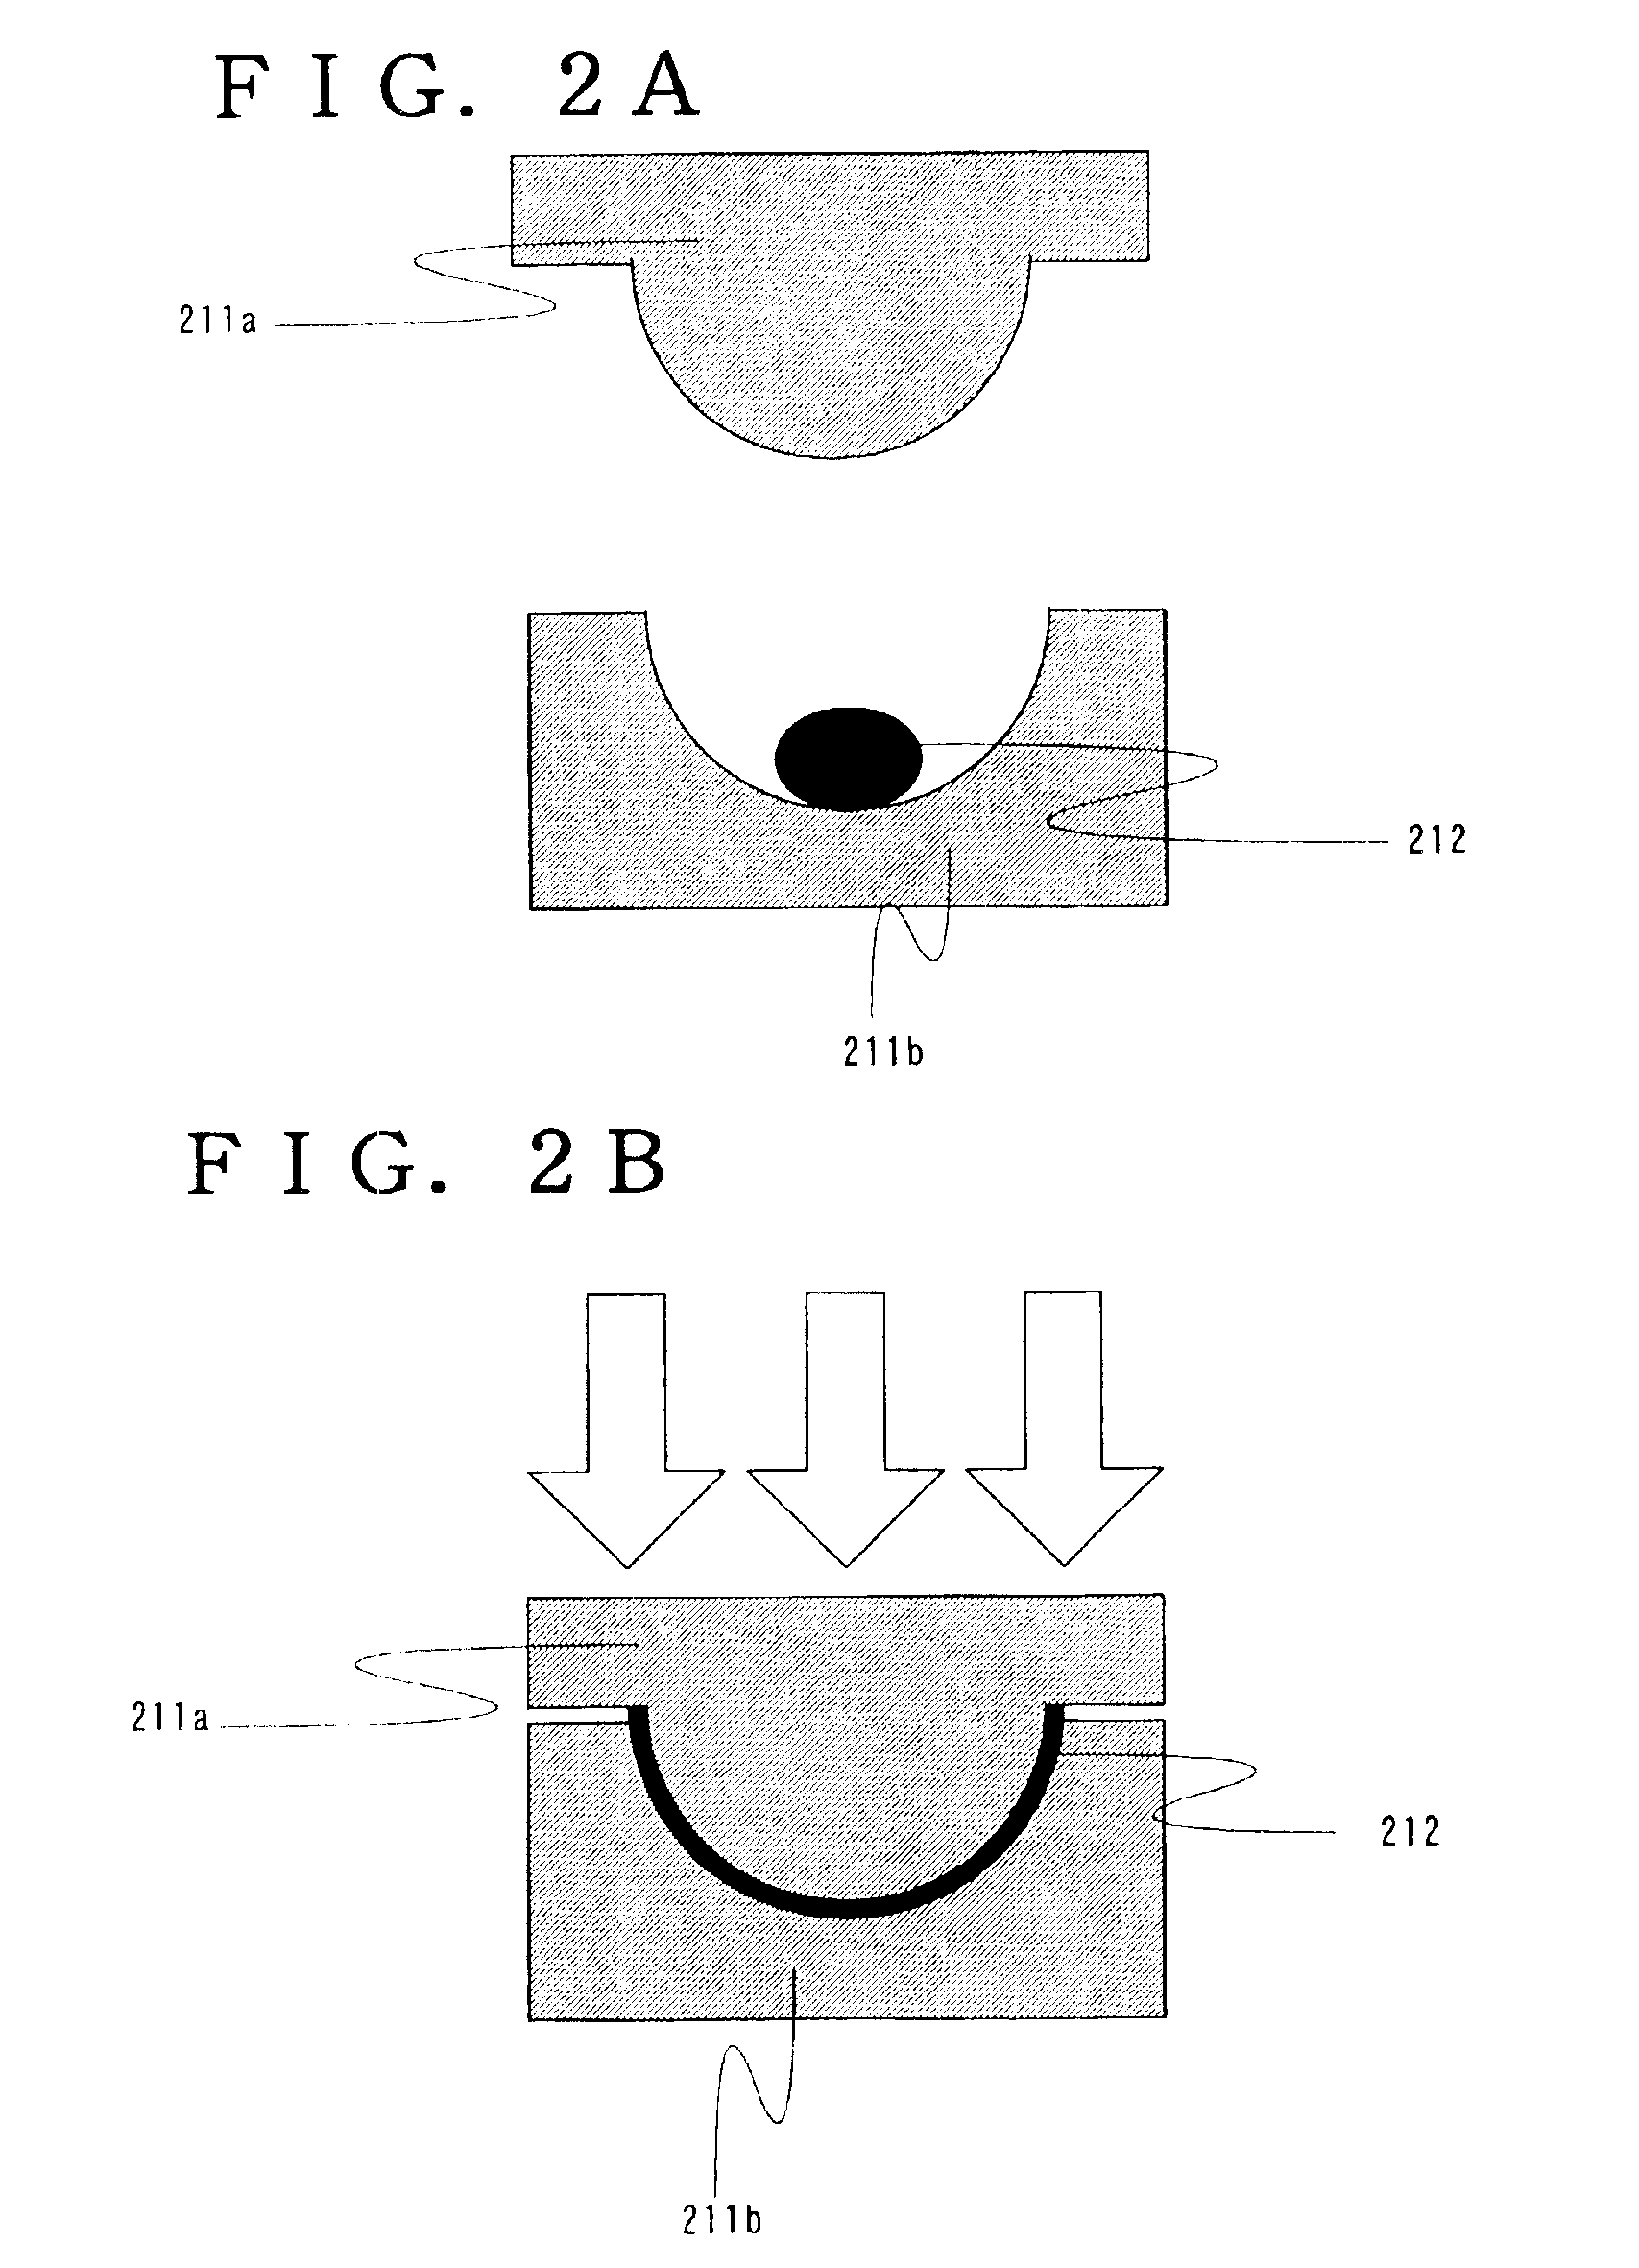 Method for fabricating a semiconductor device by transferring a layer to a support with curvature